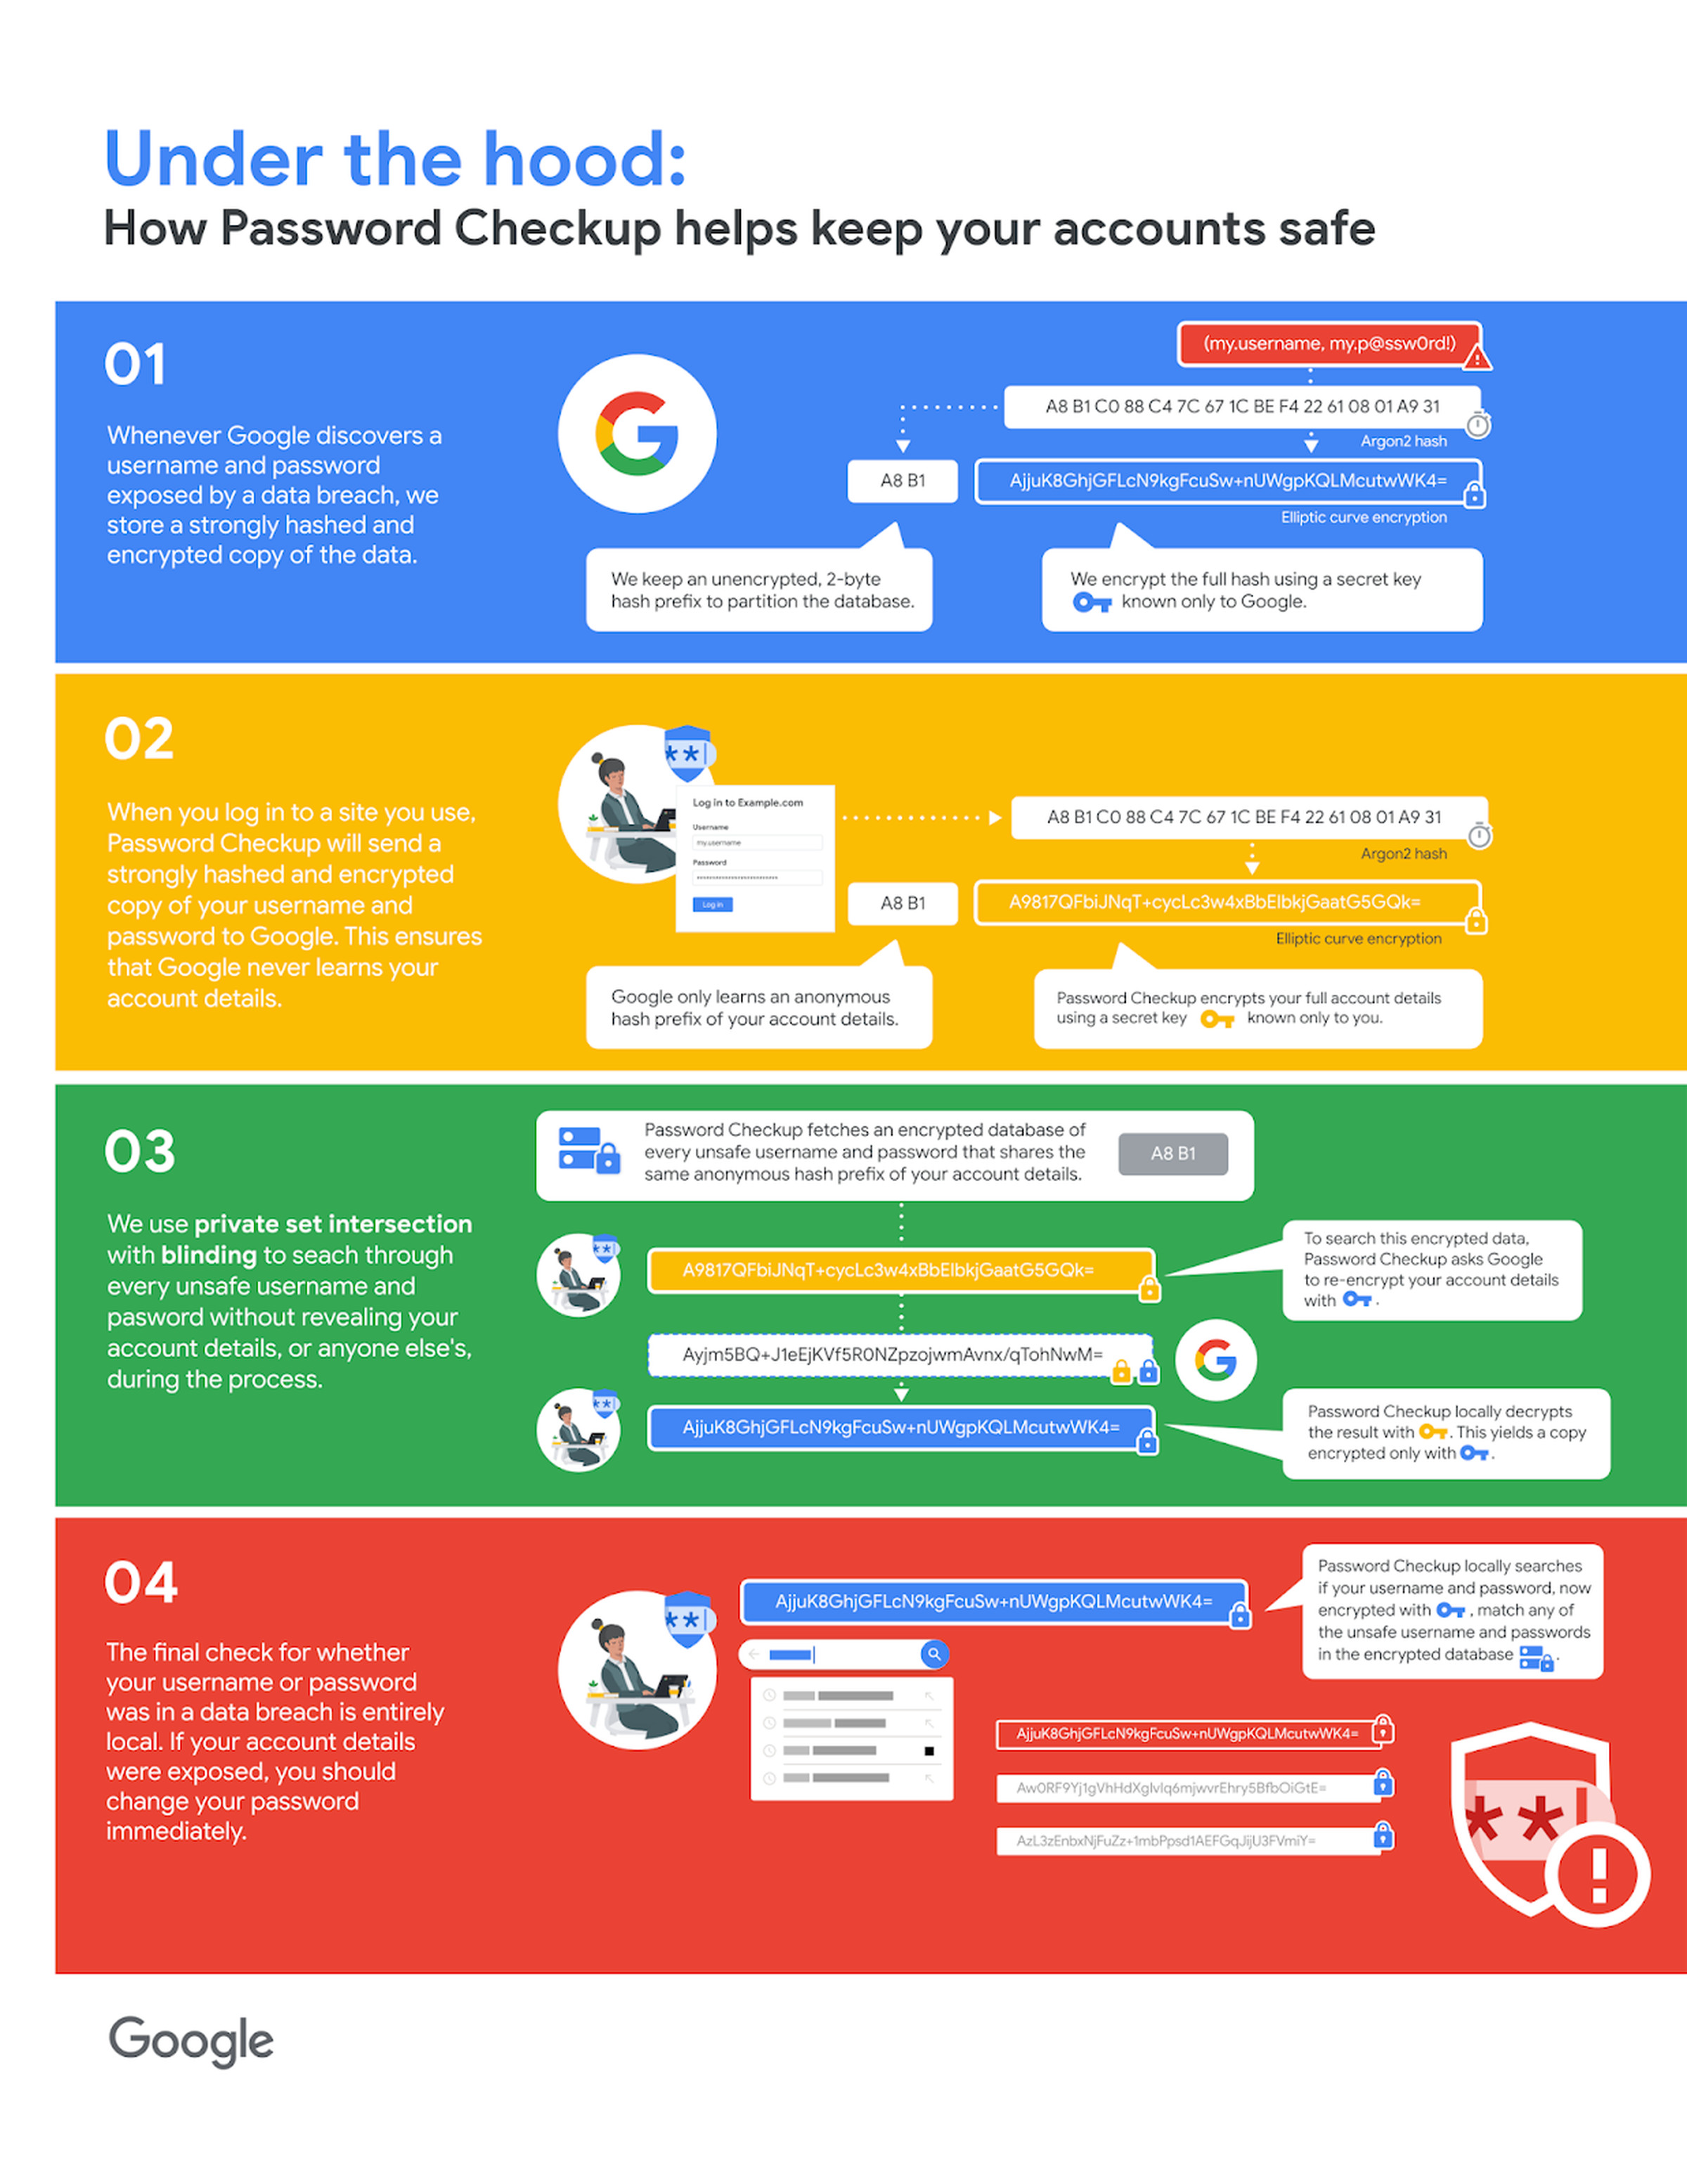 An infographic from Google describing how Password Checkup works.